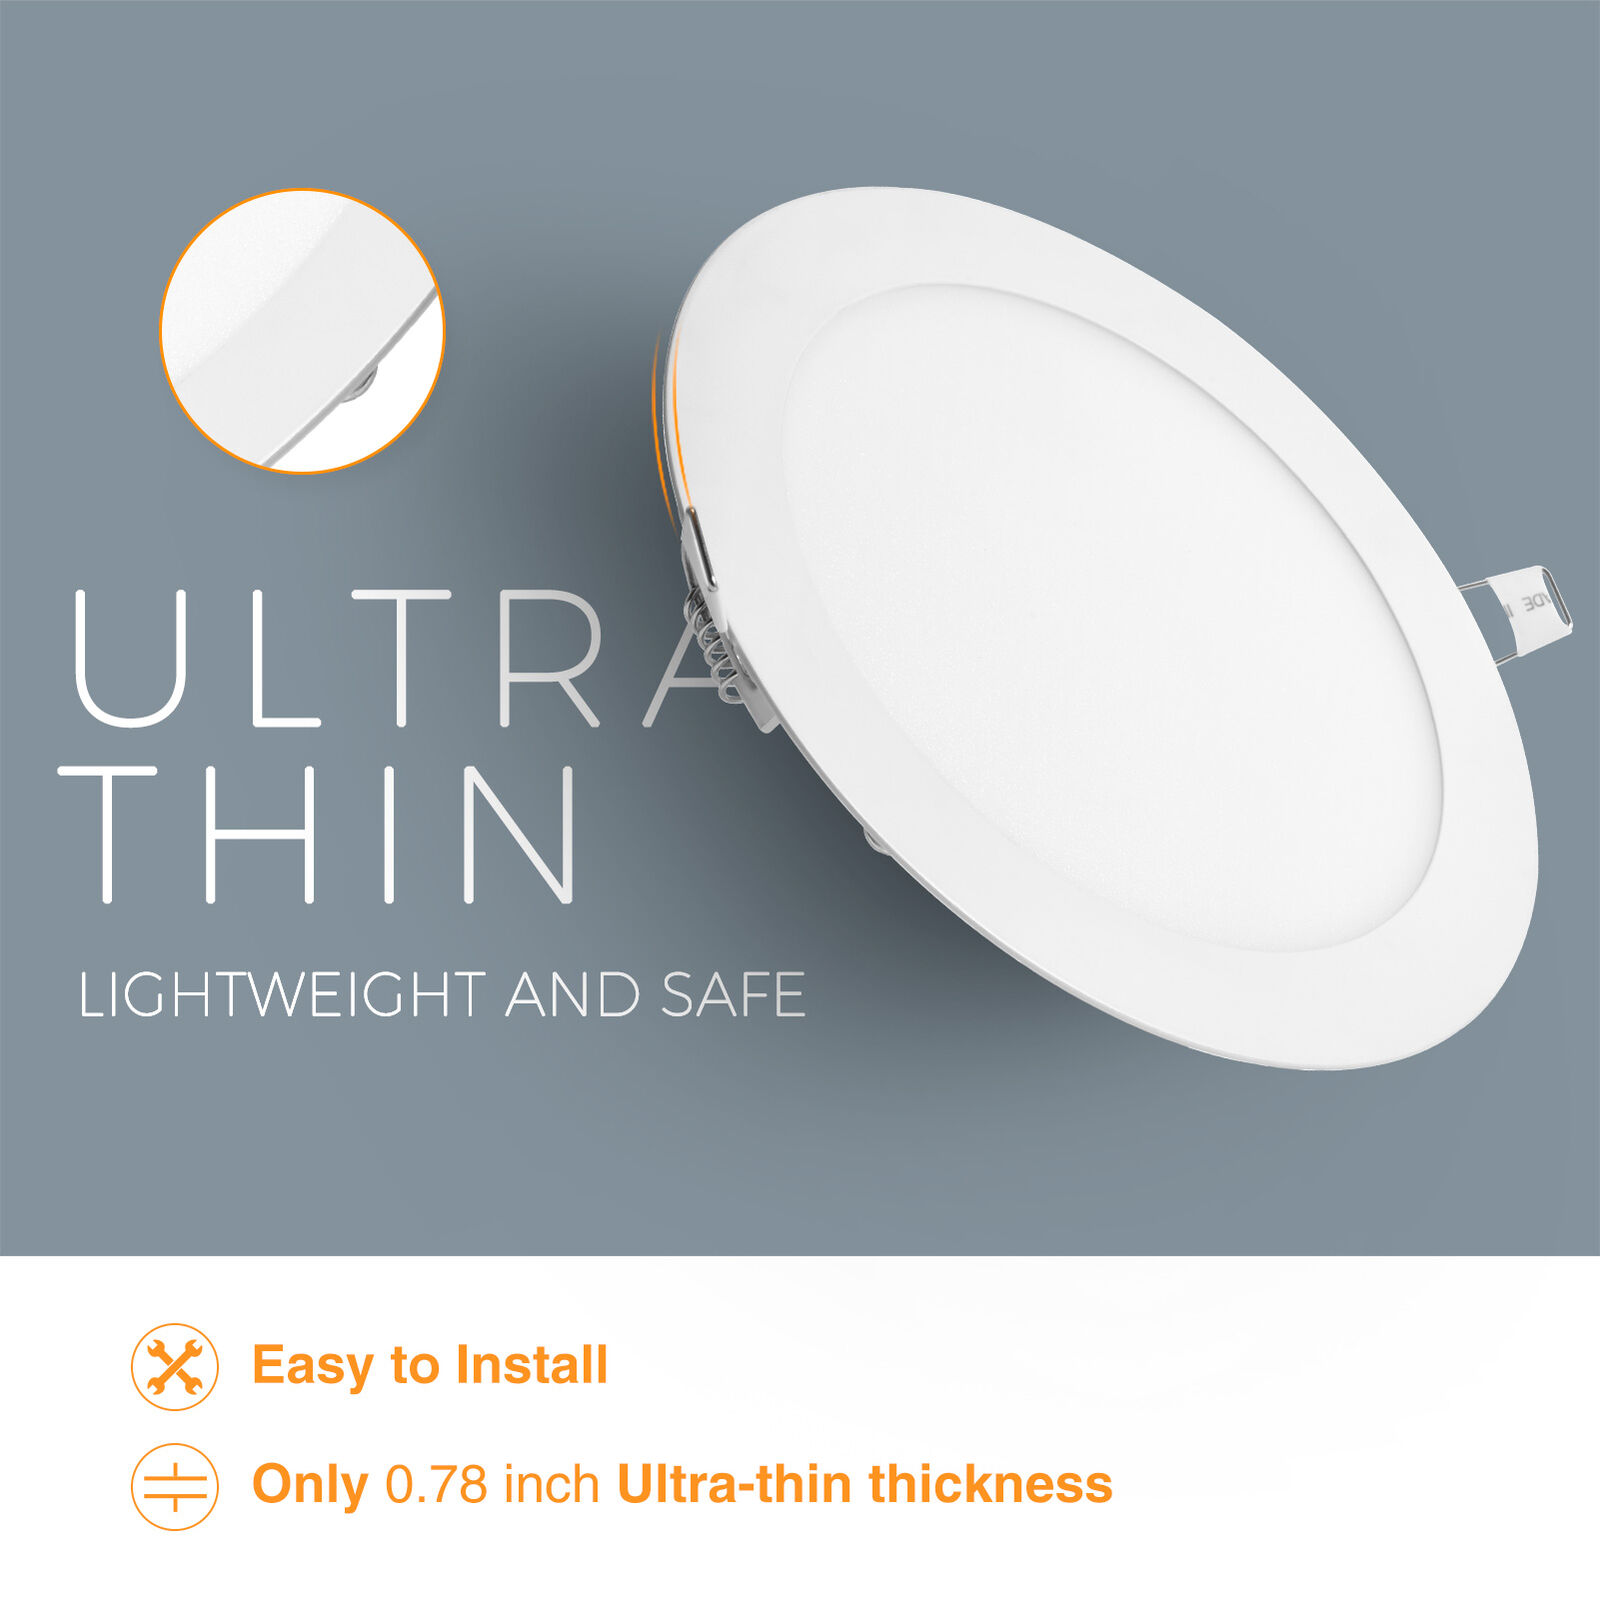 6 Pack 6 Inch LED Ceiling Lights Ultra-Thin Recessed Retrofit Kit 6000K Daylight Cutever Does not apply - фотография #3